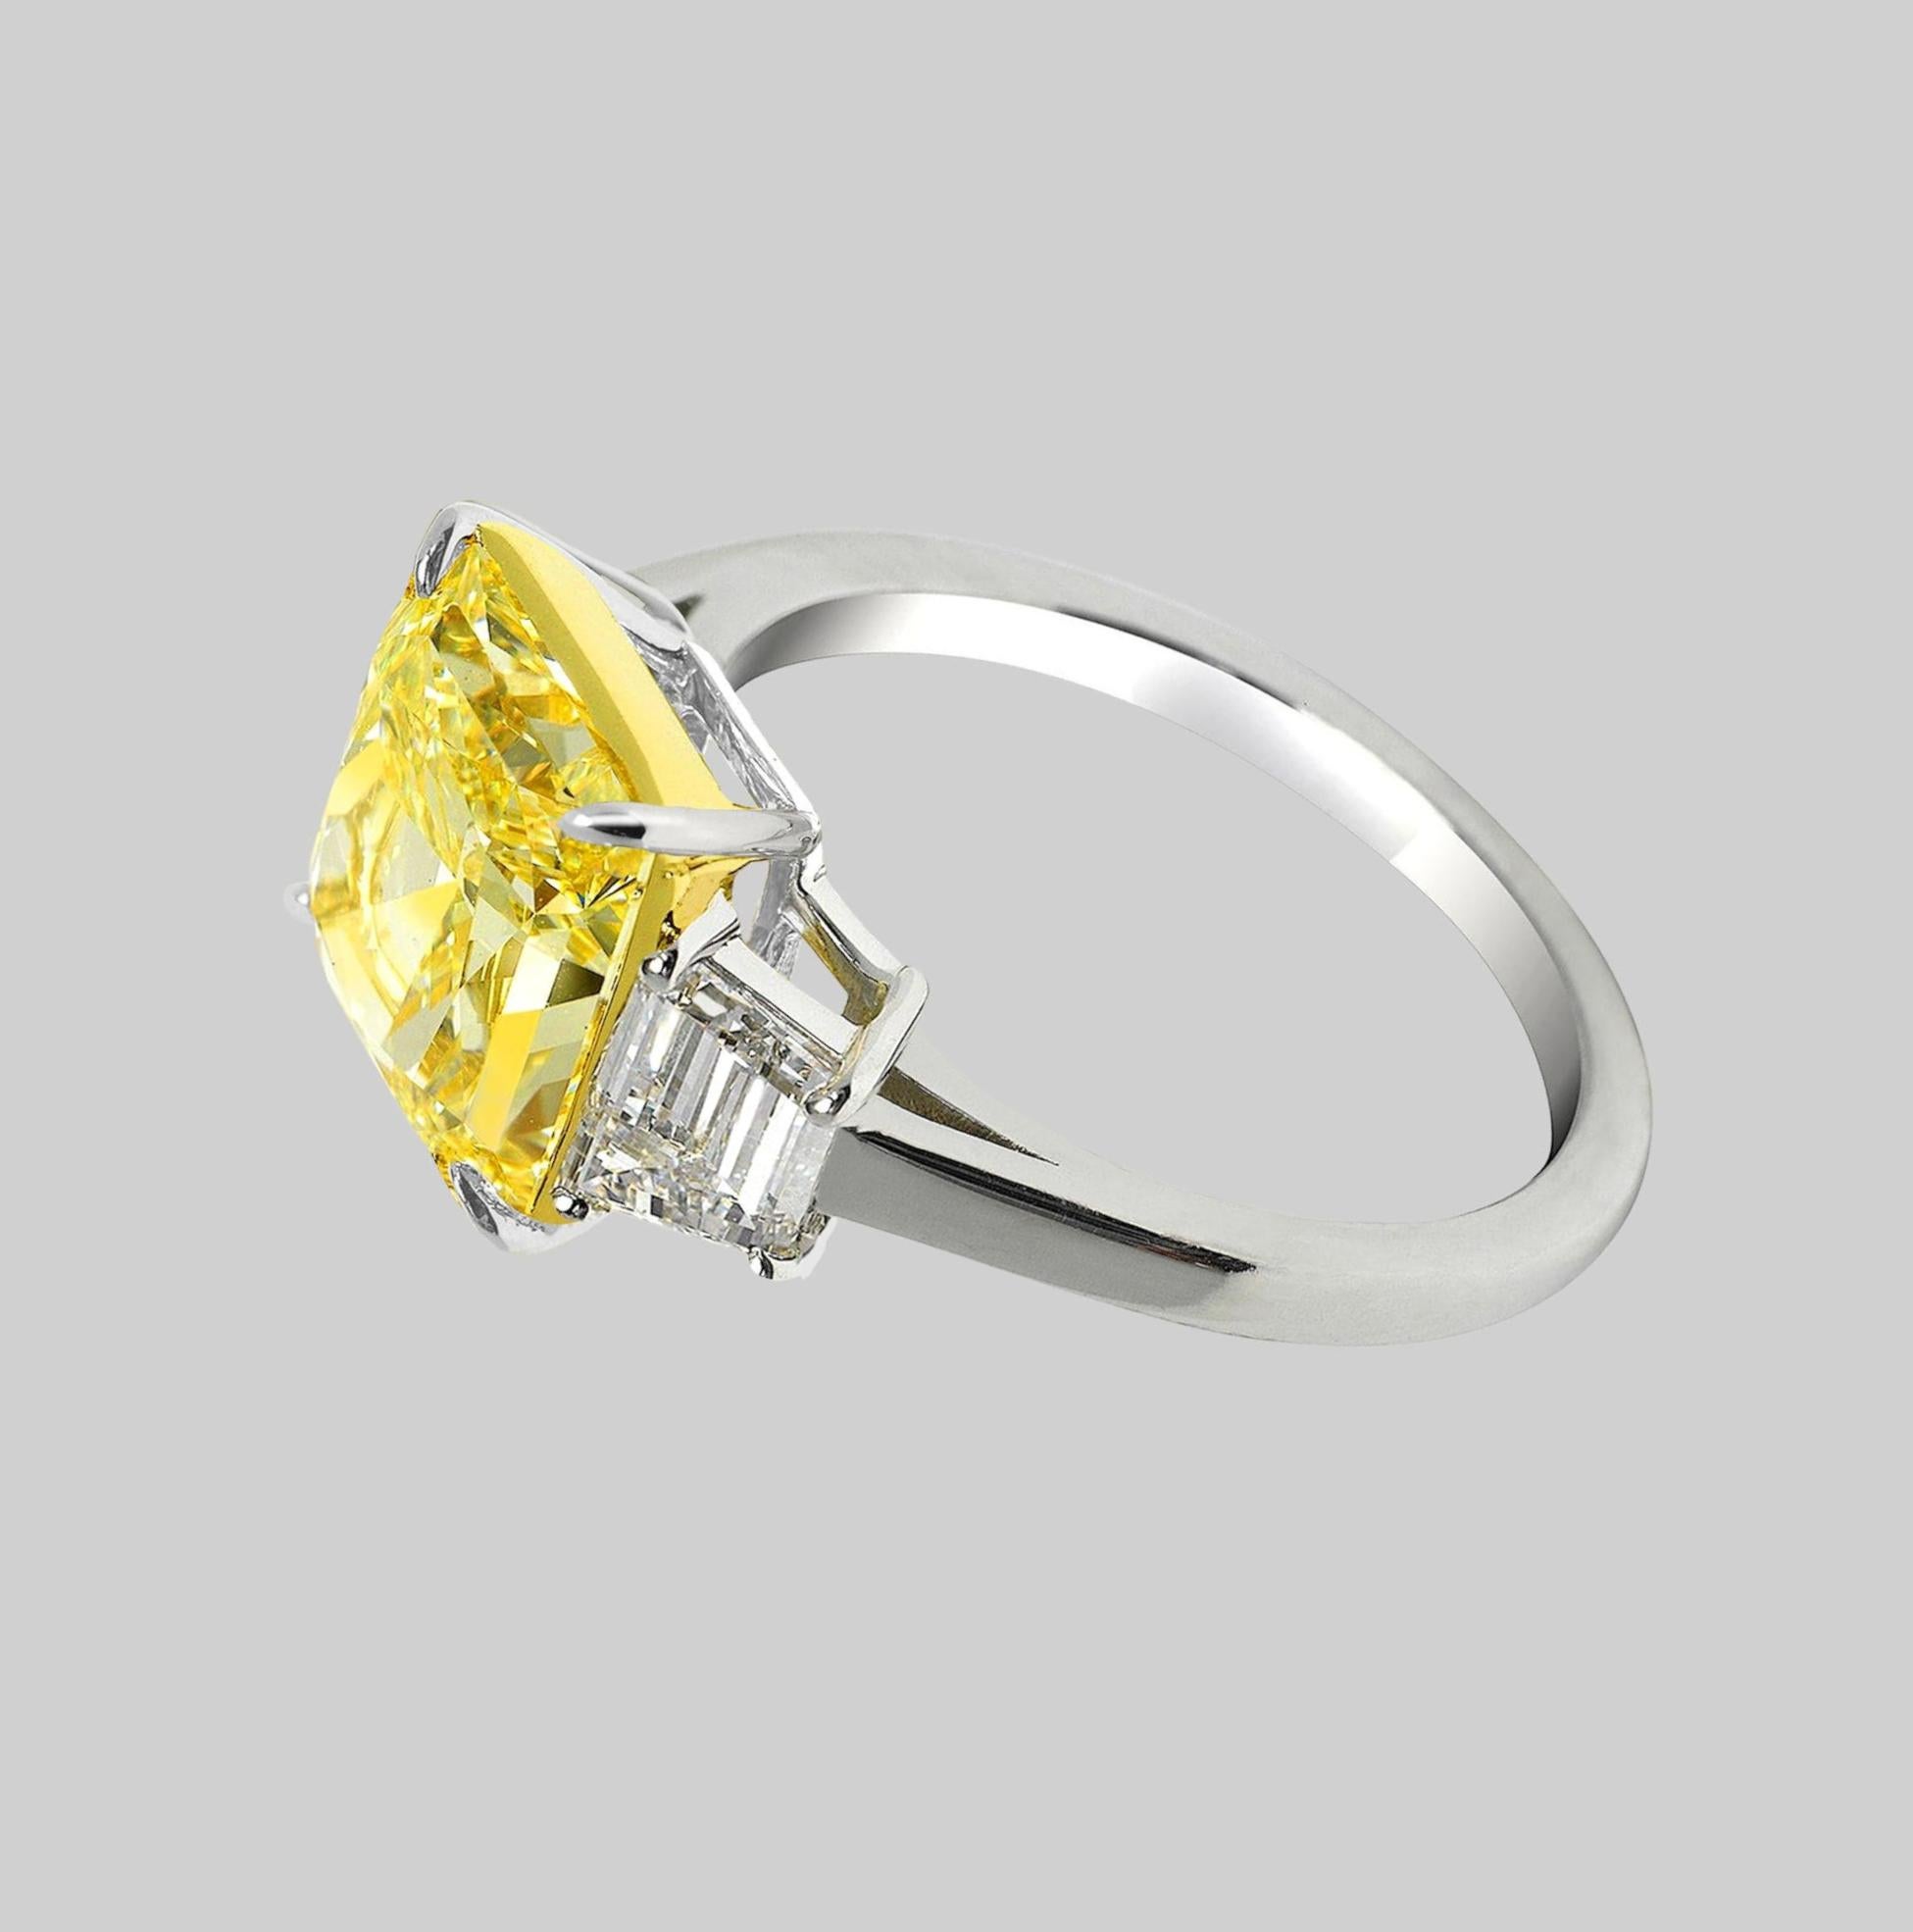 Experience the exquisite beauty of this GIA-certified 7-carat Fancy Intense Yellow Radiant Diamond Ring. The intense yellow color of the diamond, coupled with its flawless clarity (IF), creates a captivating and timeless allure. 

The radiant cut